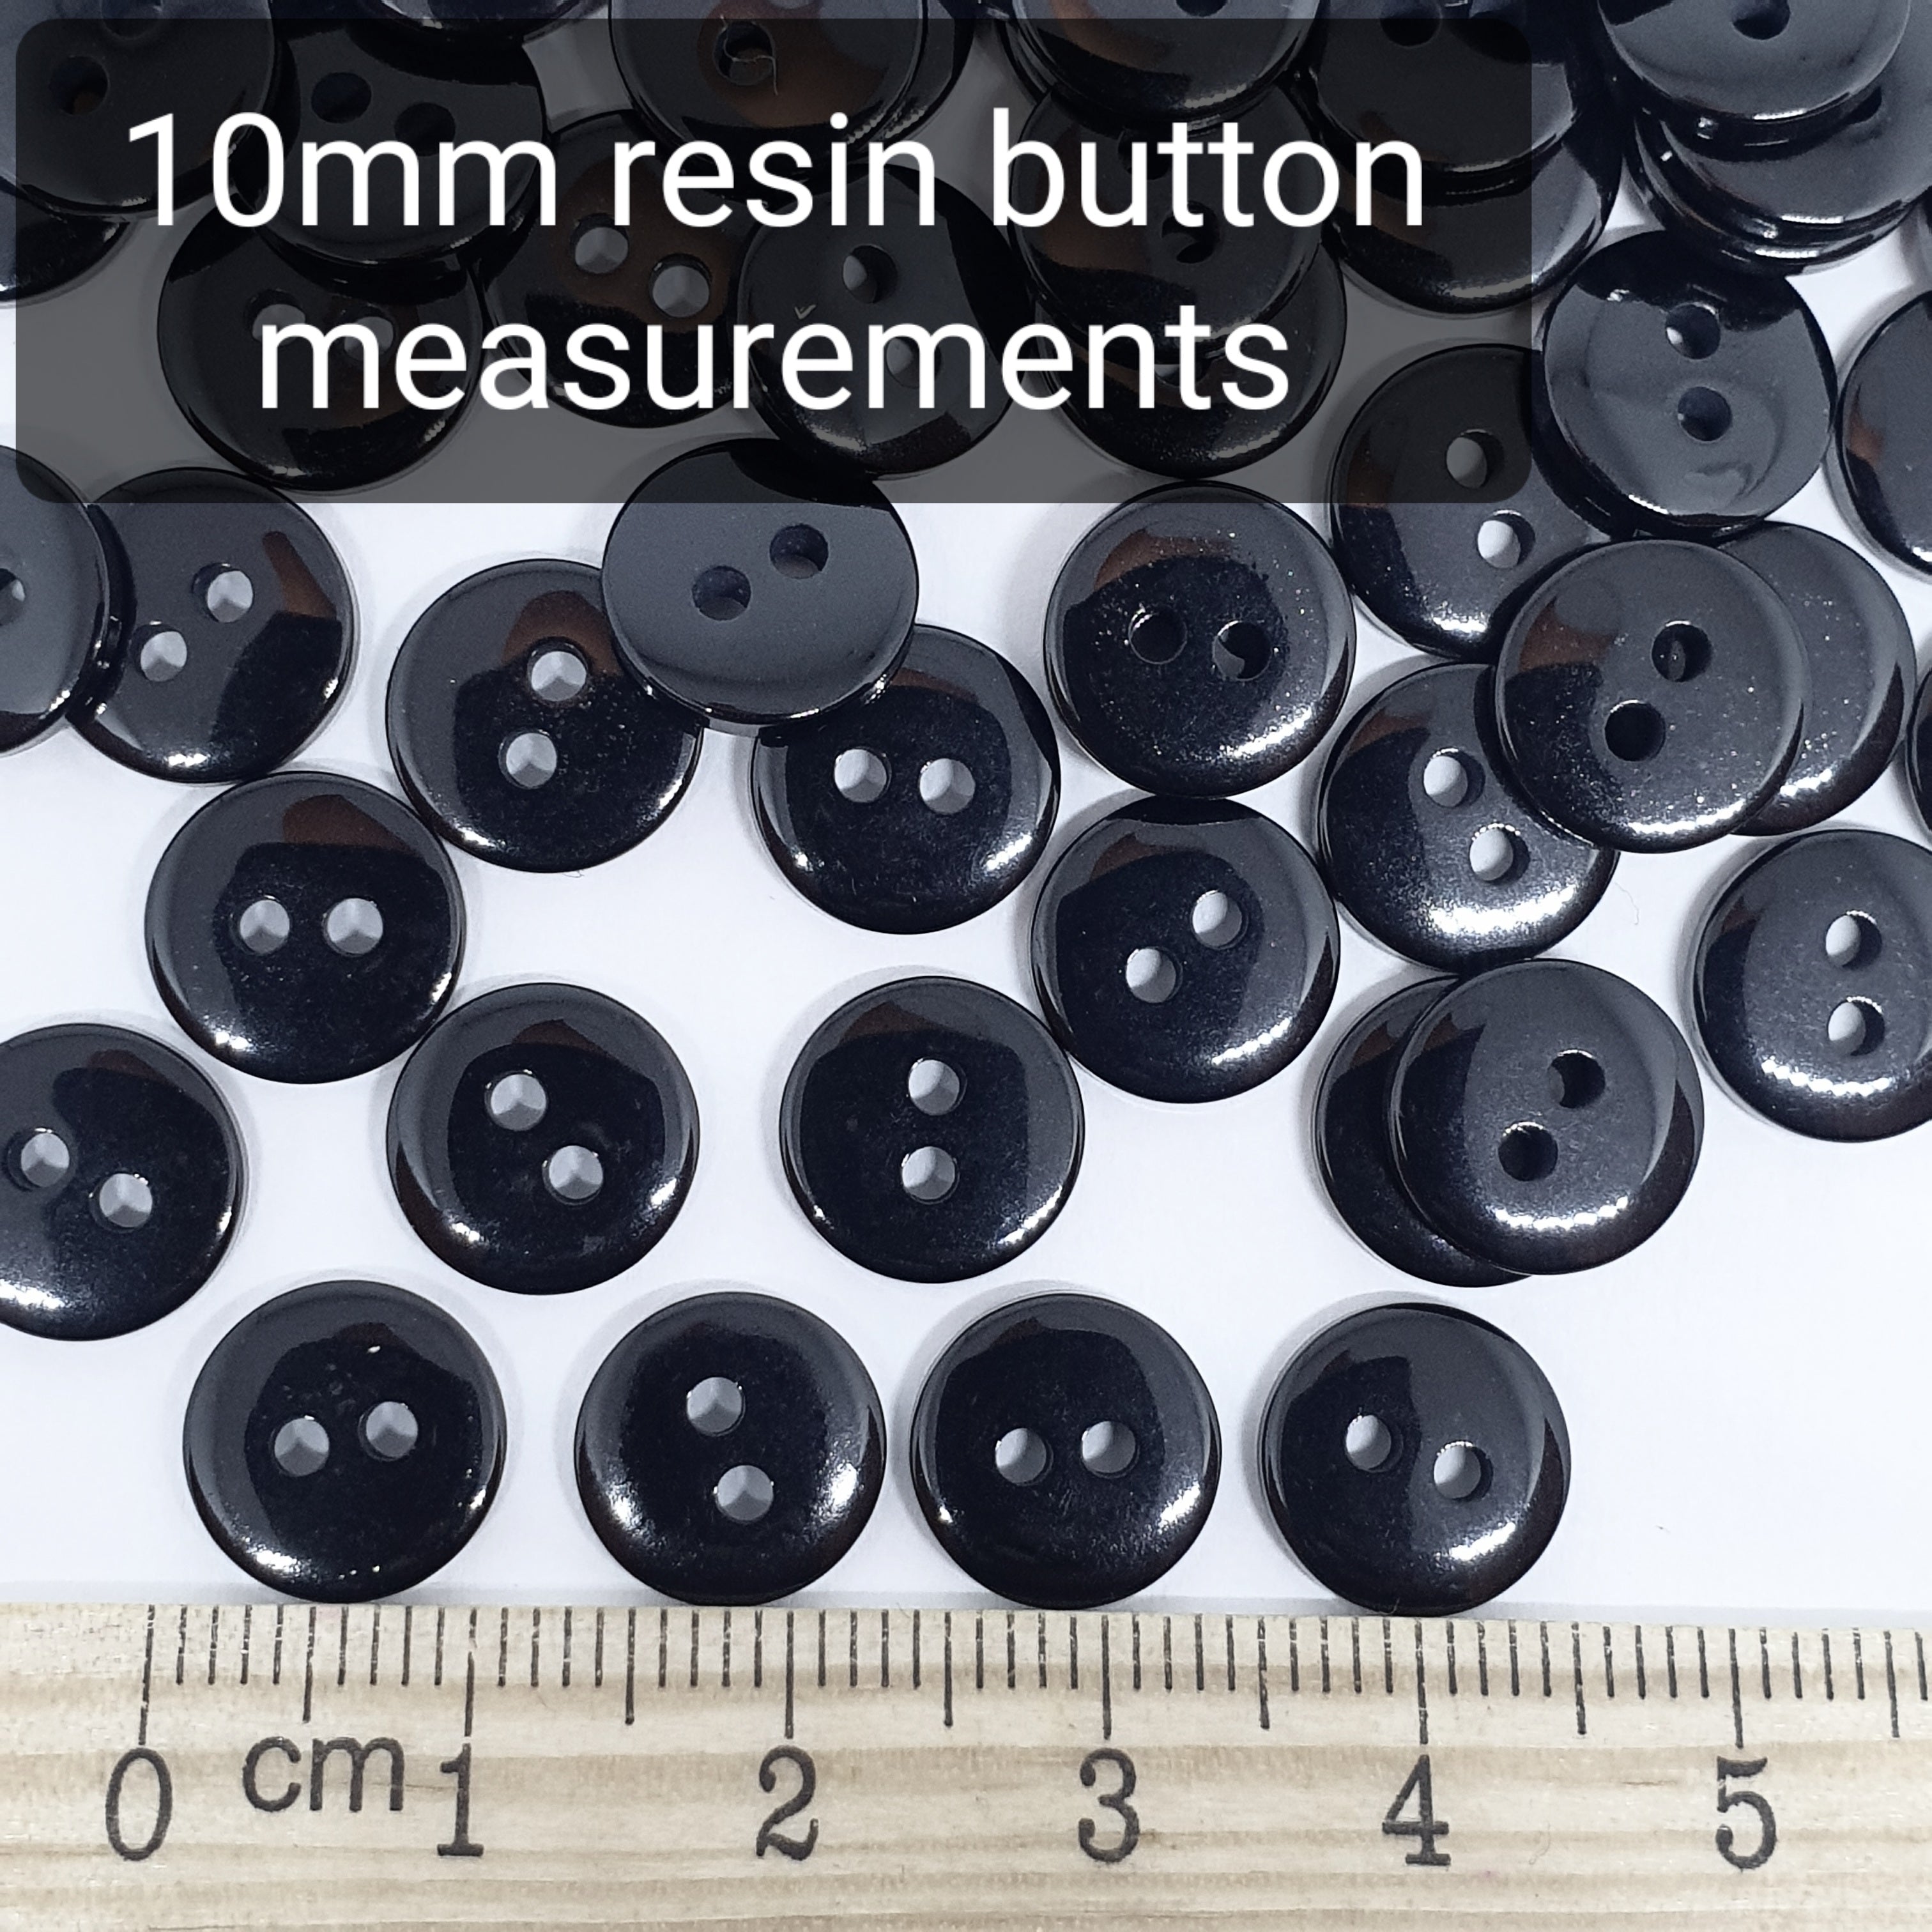 MajorCrafts 120pcs 10mm Red 2 Holes Small Round Resin Sewing Buttons B7